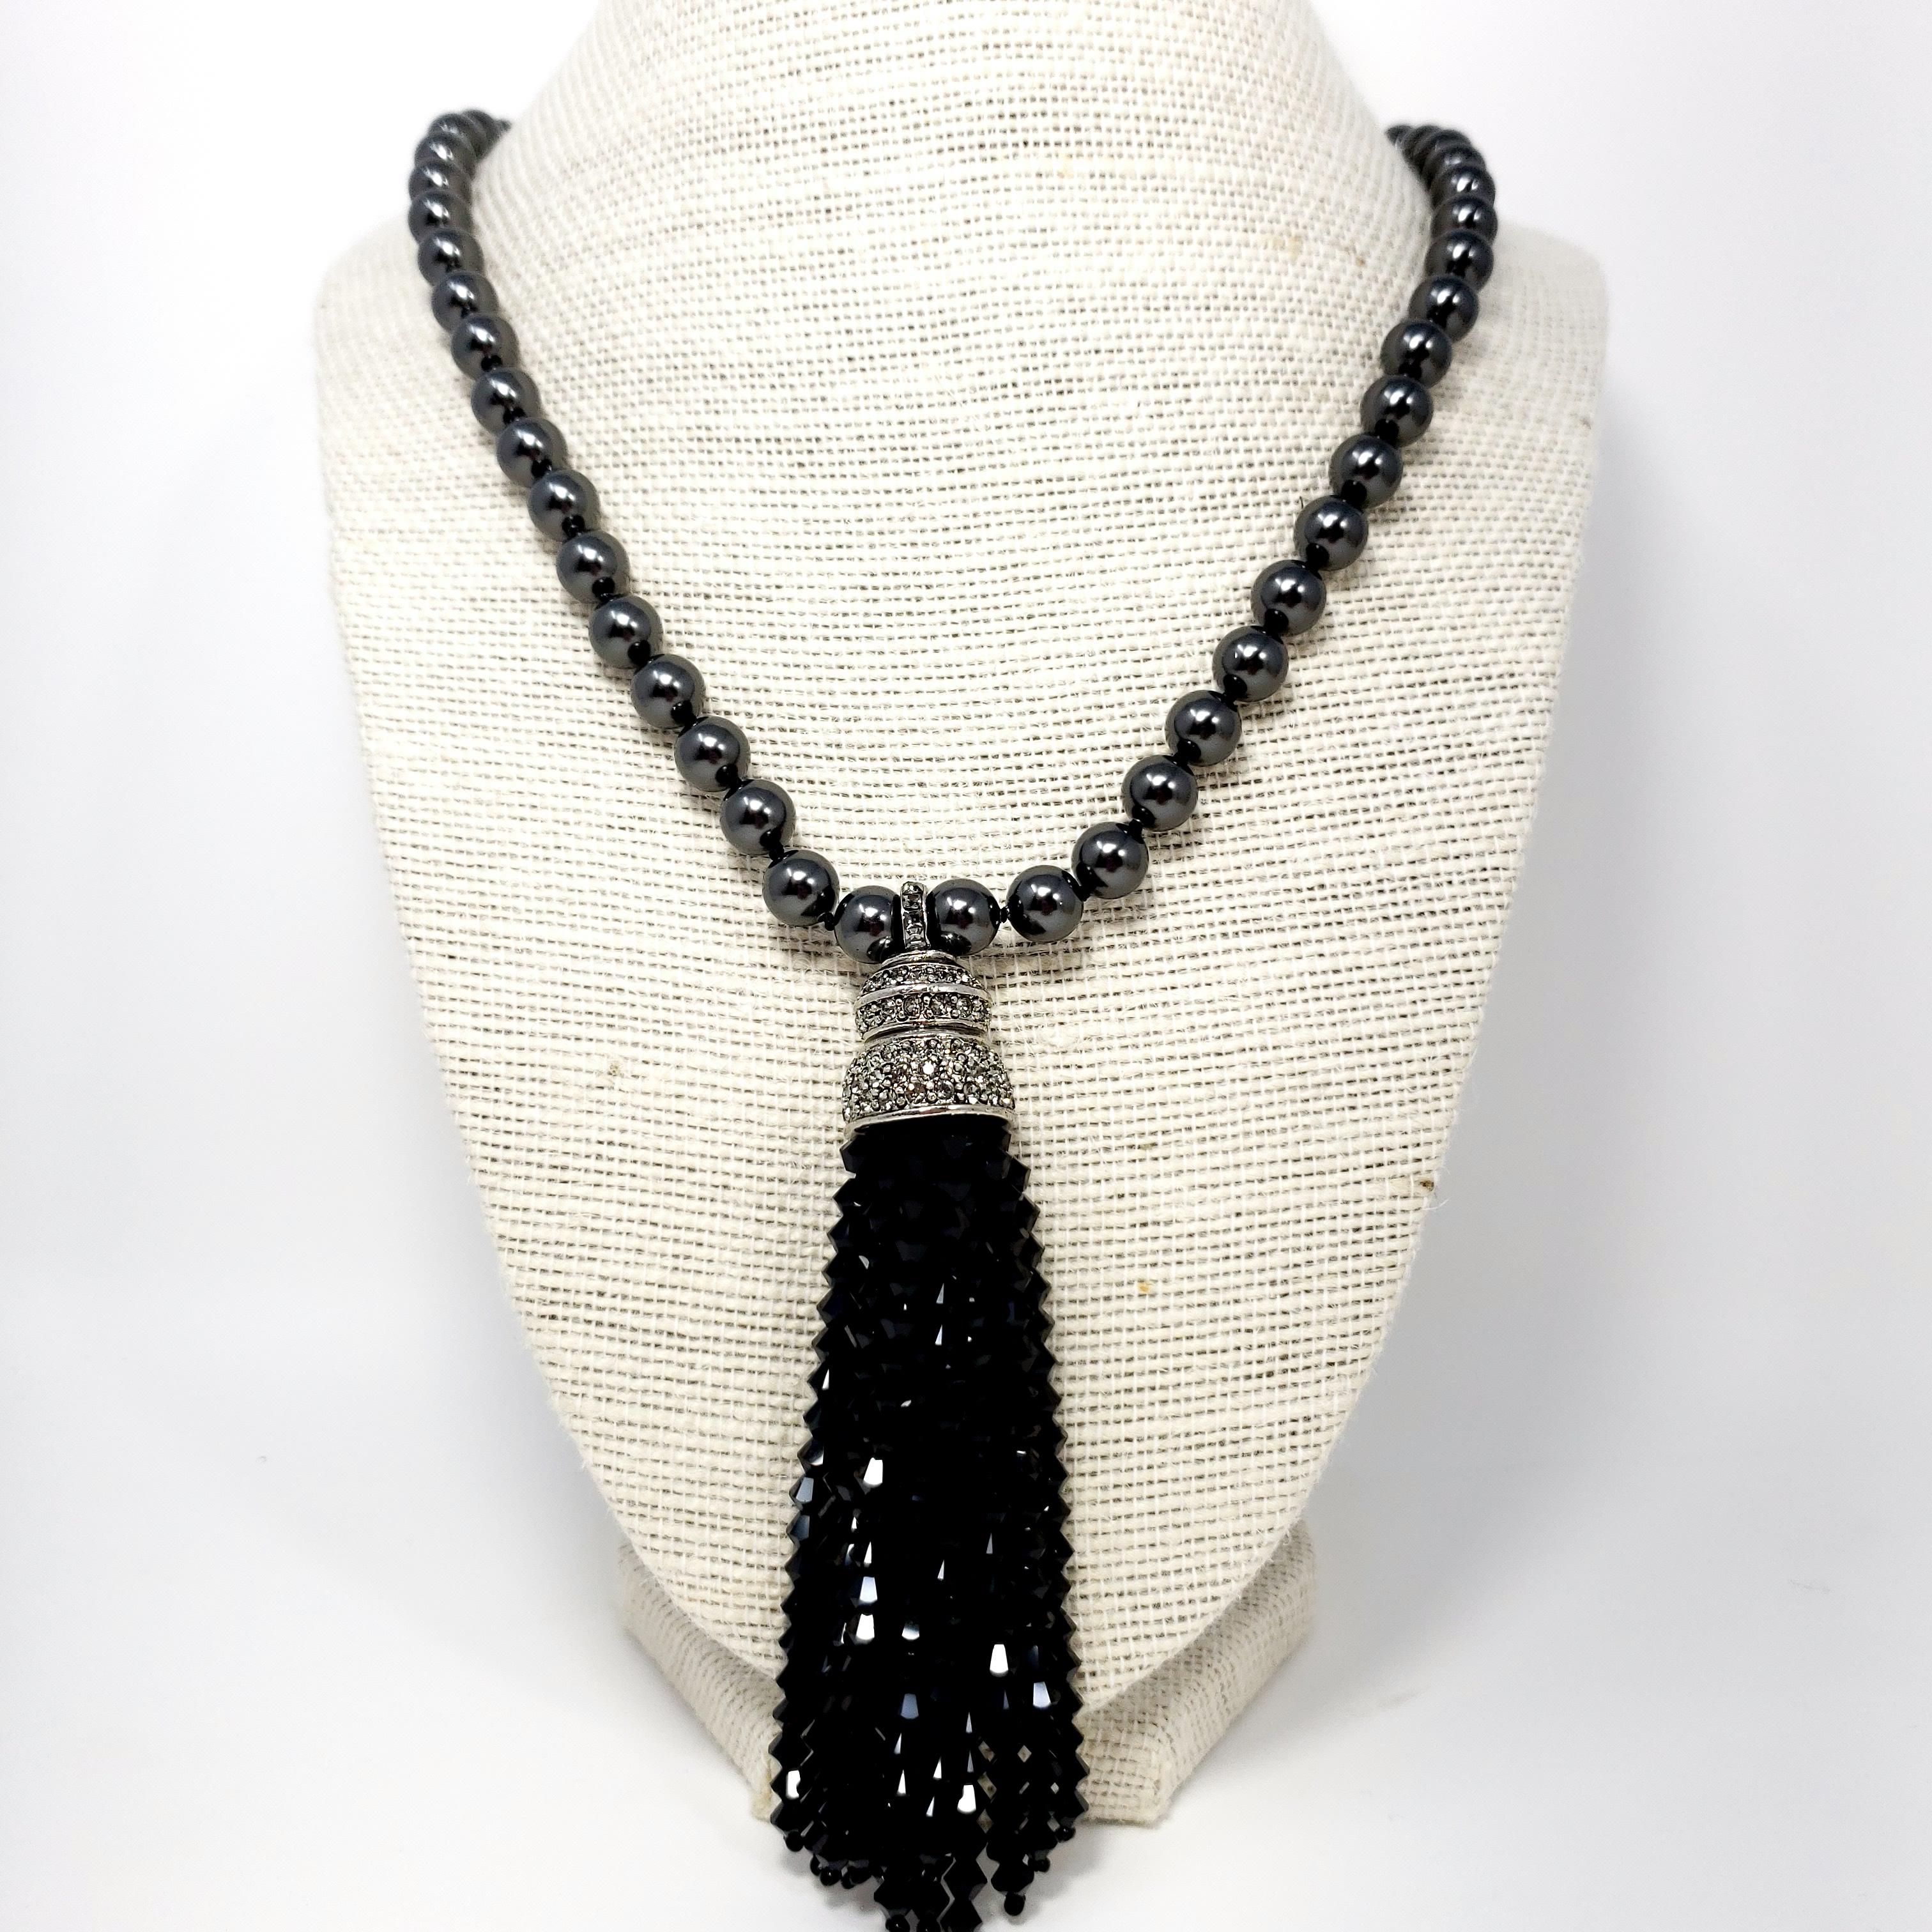 Black pearl, onyx and rhodium beaded tassel necklace from Oscar de la Renta.

A long, single strand of dark faux-pearls, connected with a rhodium pave-crystal ball fastening. Strands of onyx crystals hang off of a rhodium crystal-encrusted